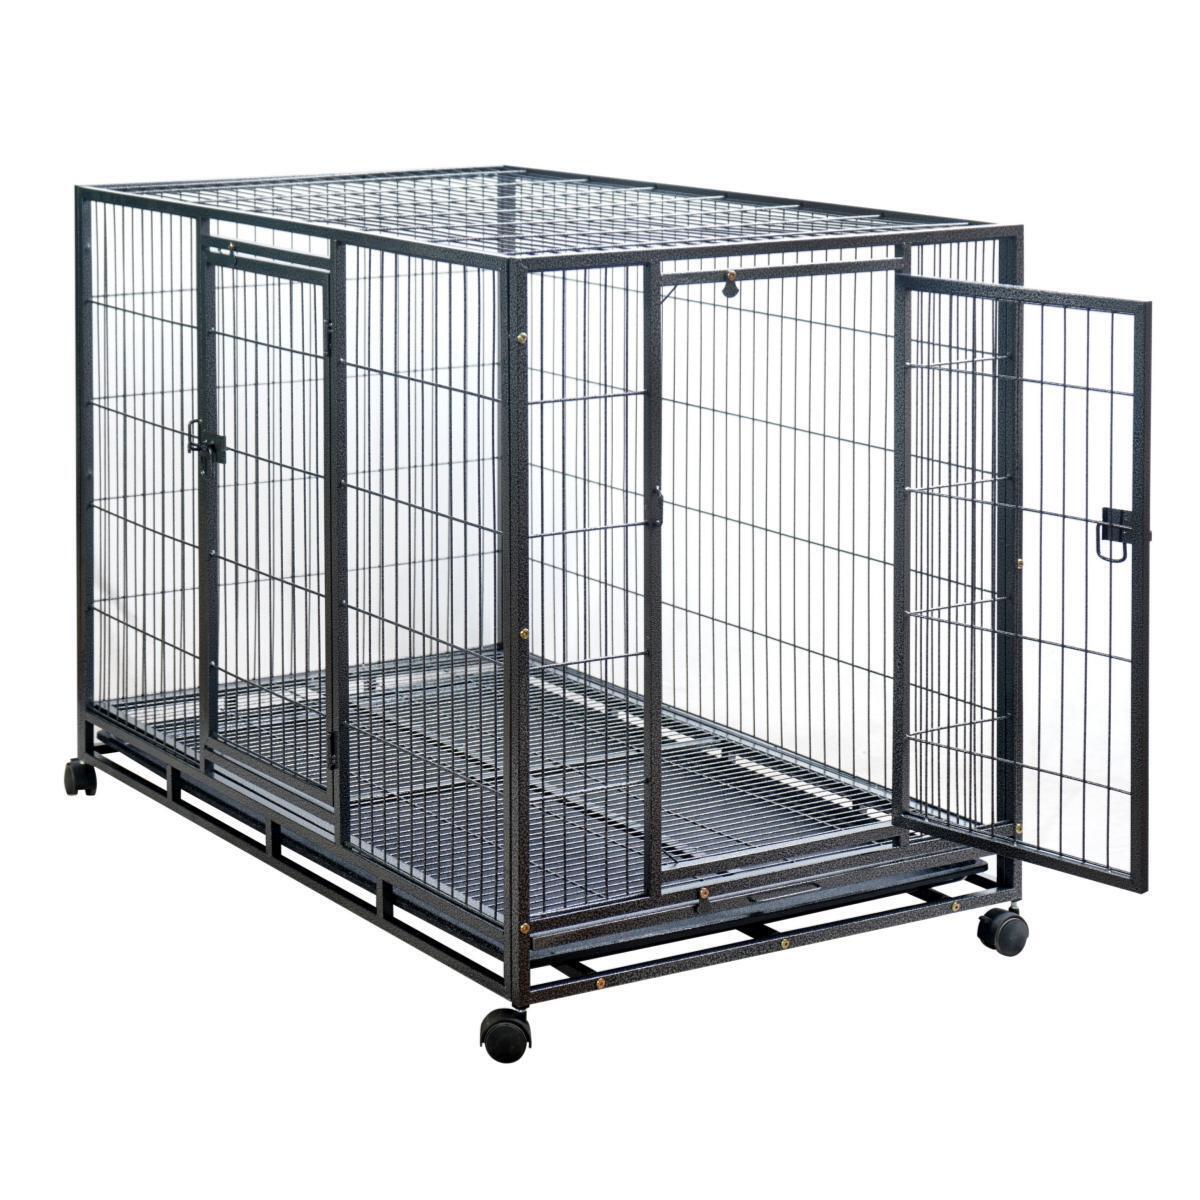 XSZ 48 inch Pet Kennel Cat Crates Secure and Foldable Double Door Metal Dog Crate Kennel Animal Playpen Divider Panel Easy to Assemble（Black） 